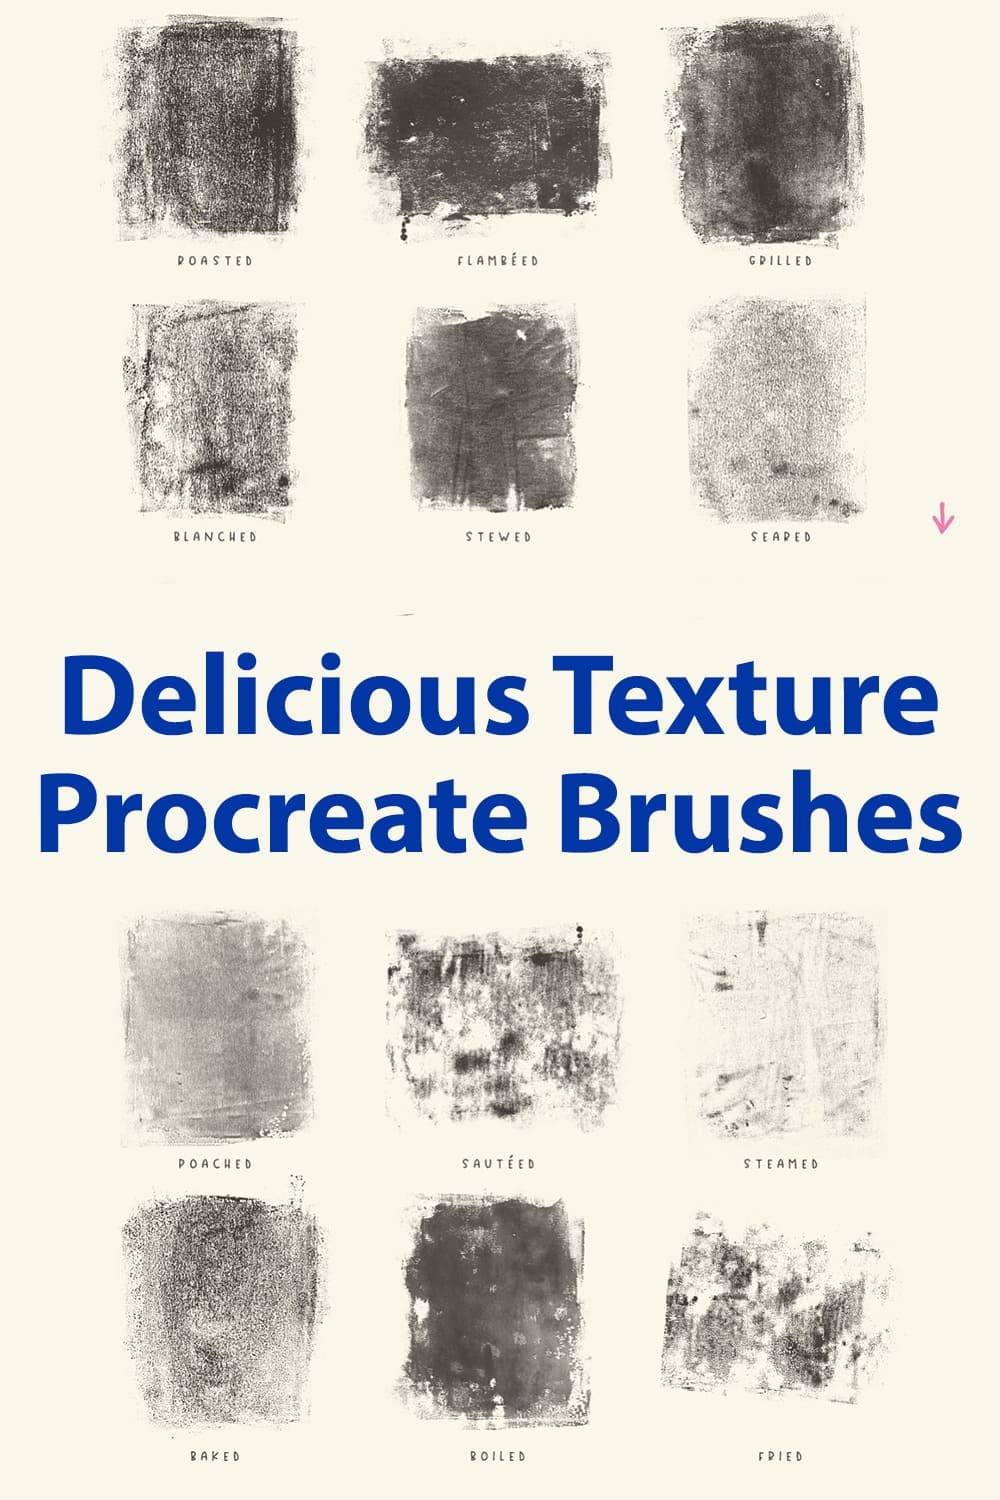 Delicious Texture Procreate Brushes Preview.